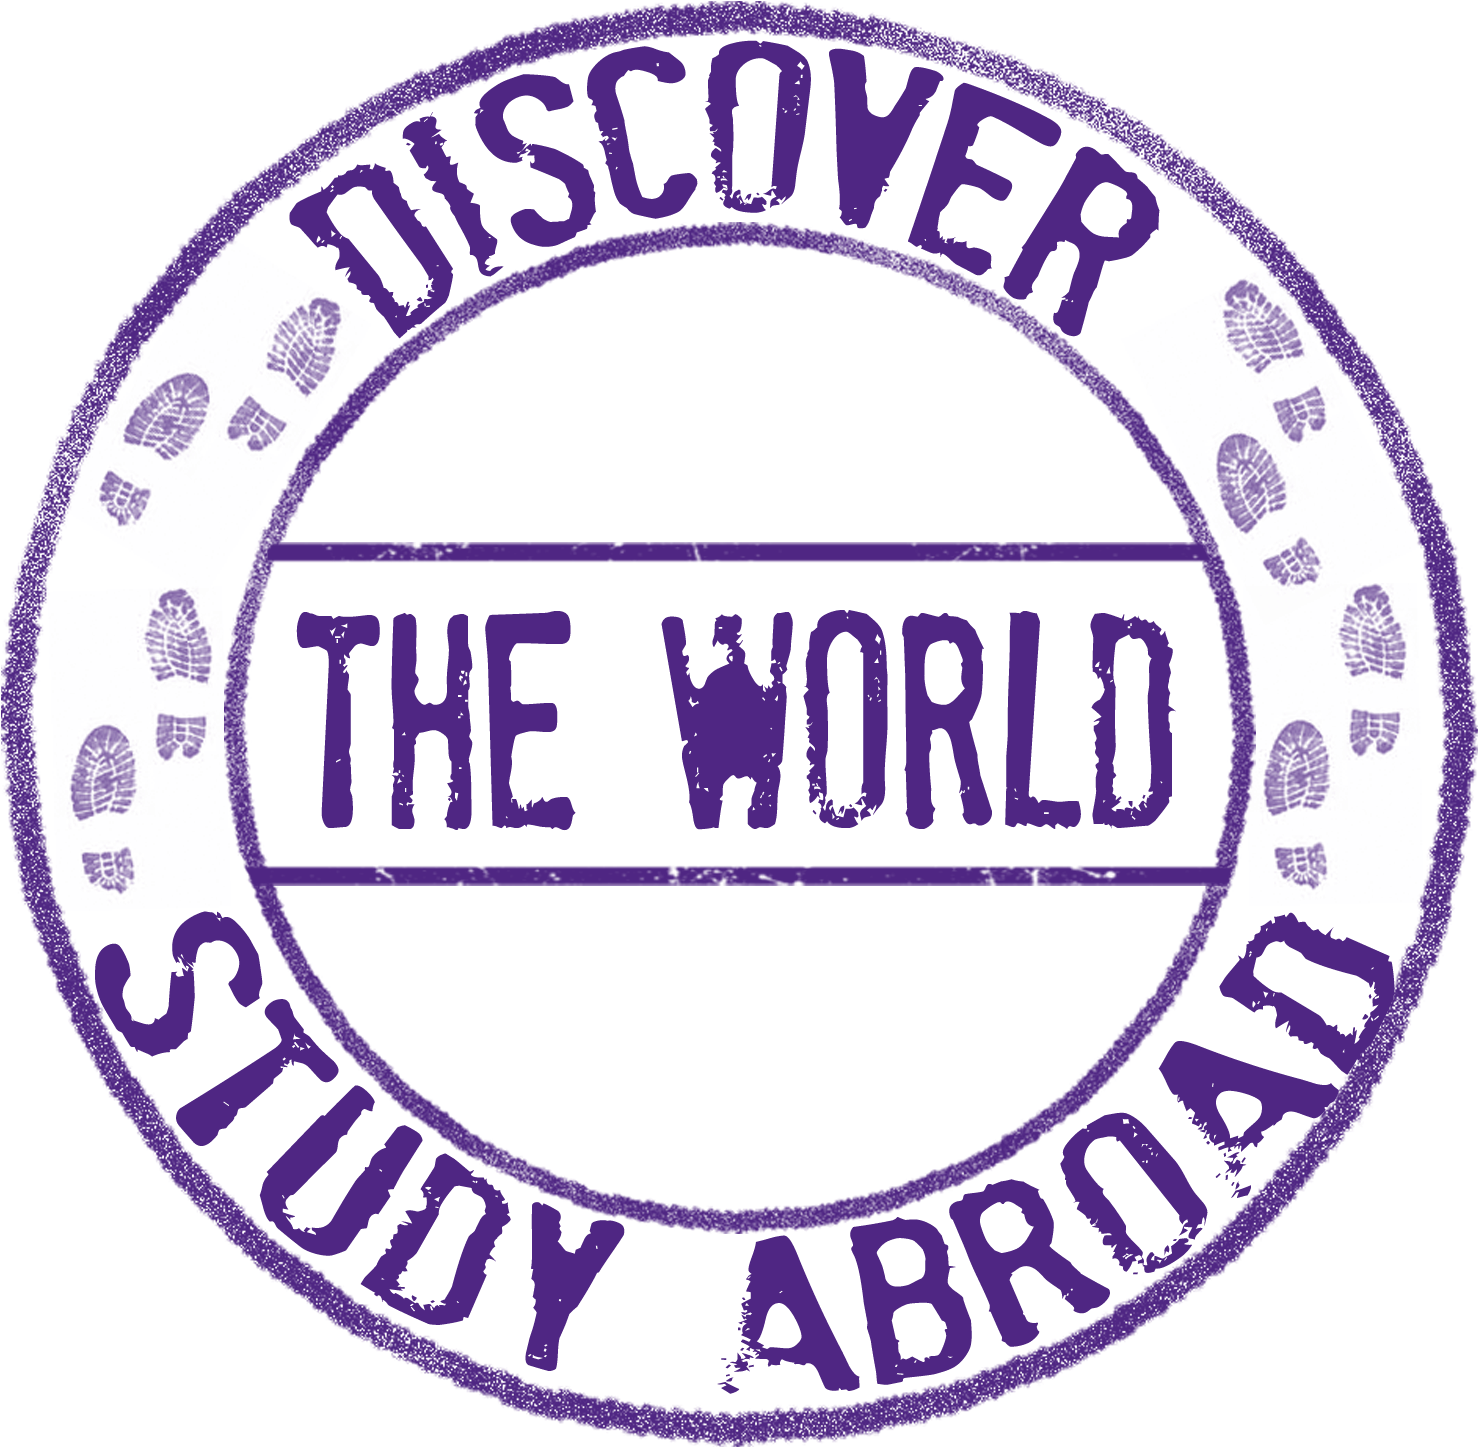 Study Abroad - Bachelor's Degree (1800x1840), Png Download